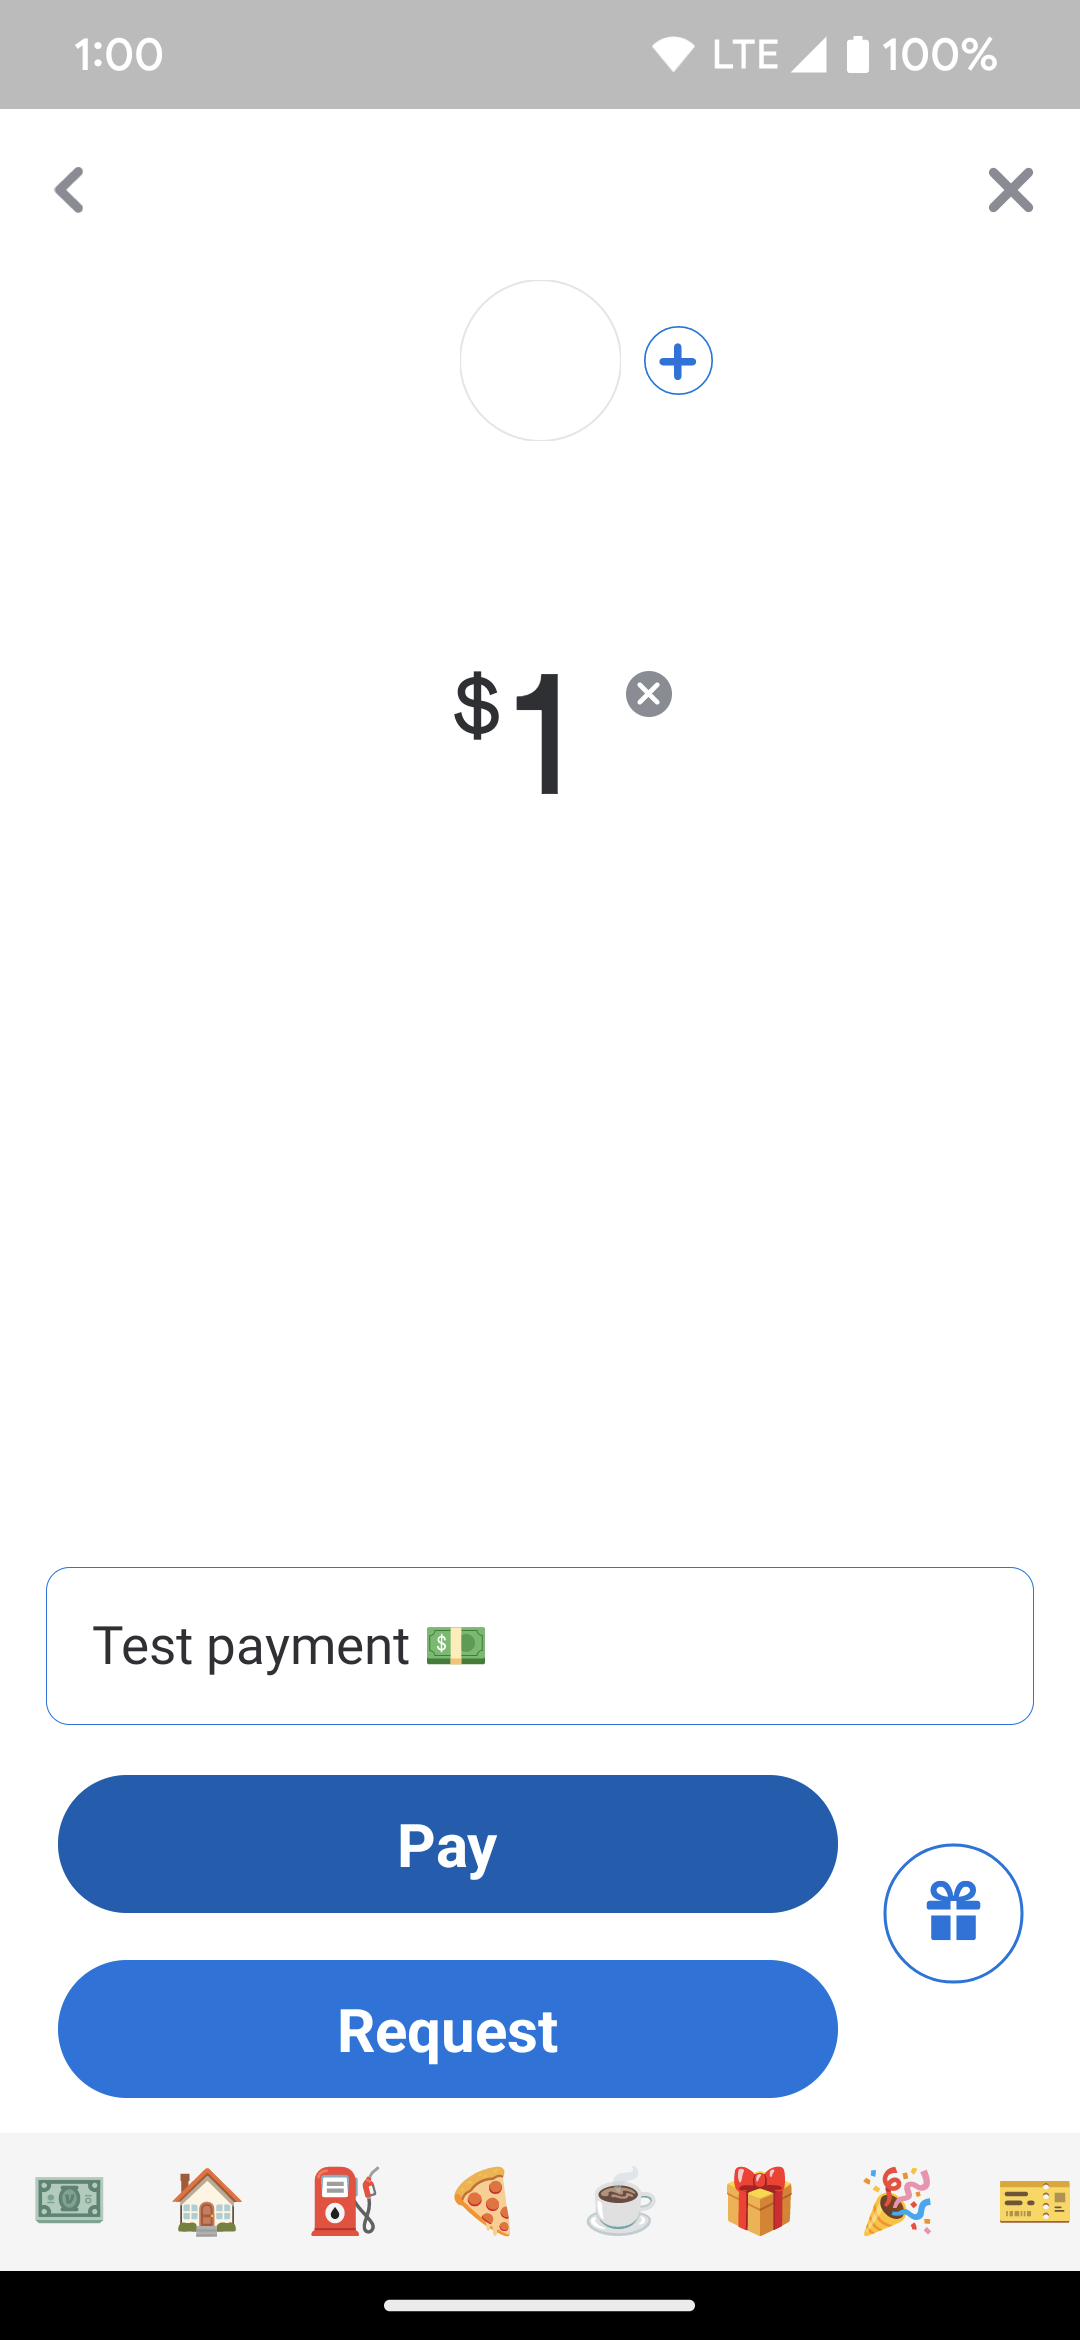 A screenshot of the pay feature in the Venmo app.